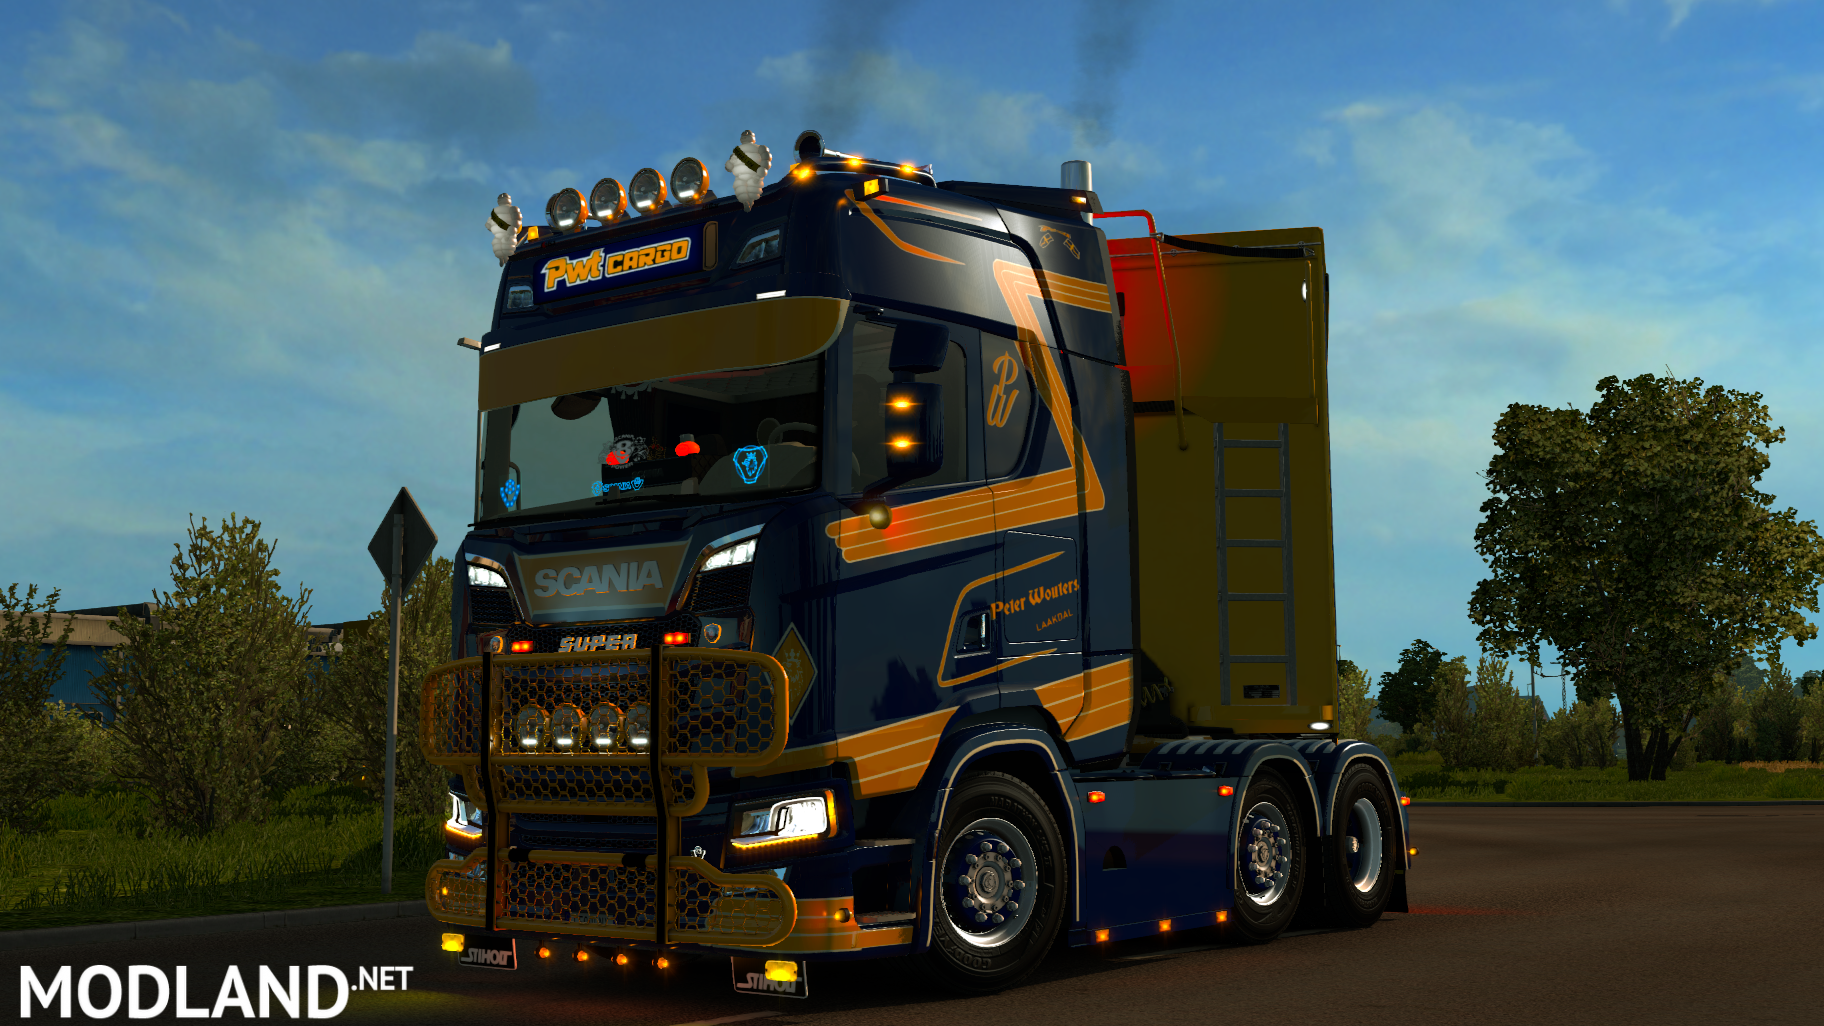 Skin PWT Cargo for Scania S + Lightbox mod for ETS 2